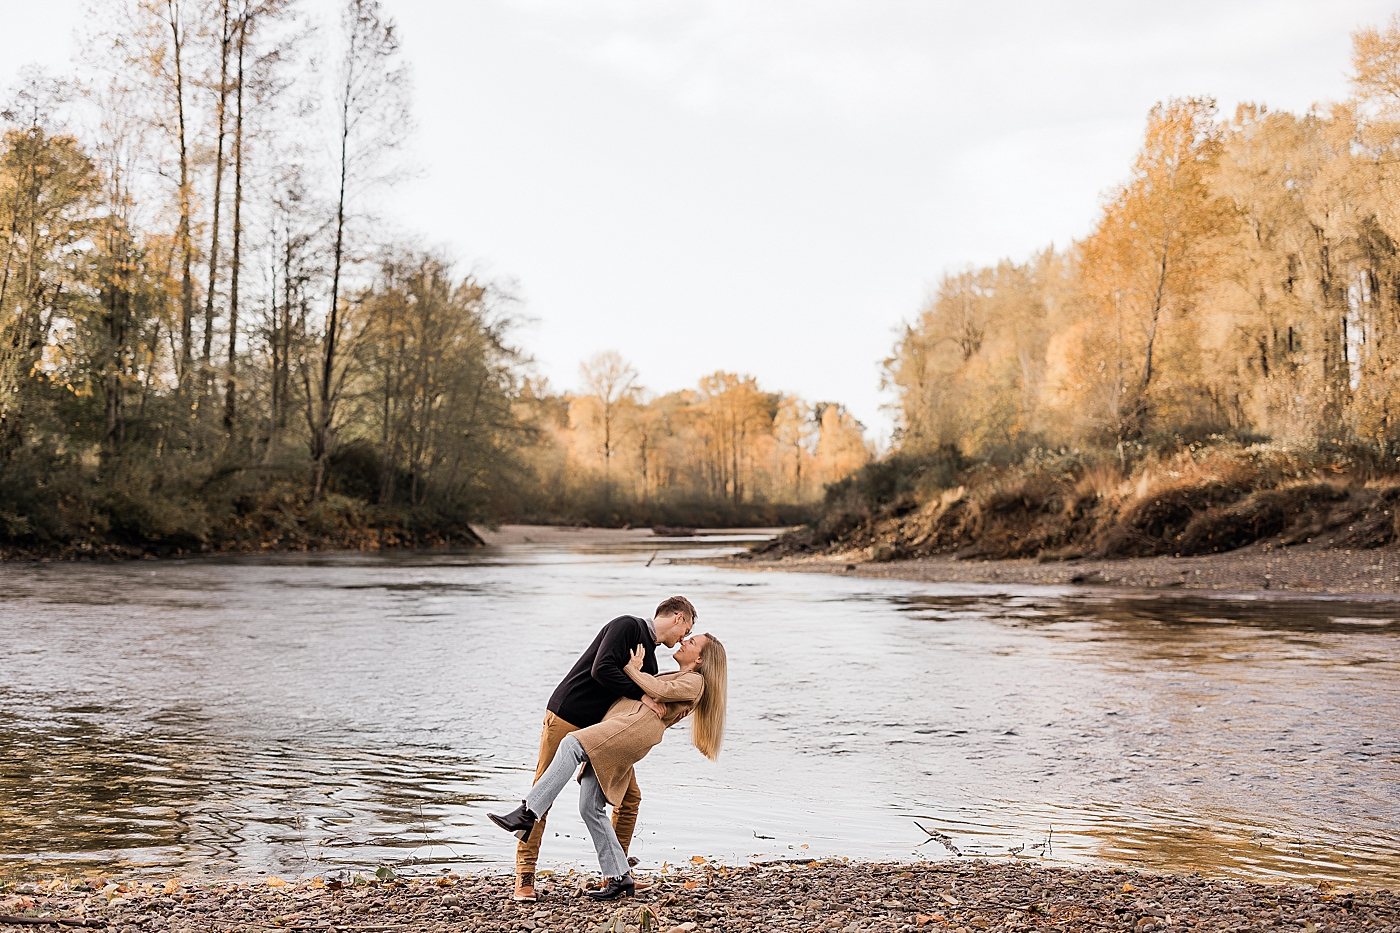 Couple dancing in front of the water along Snoqualmie River. Photo by Megan Montalvo Photography.